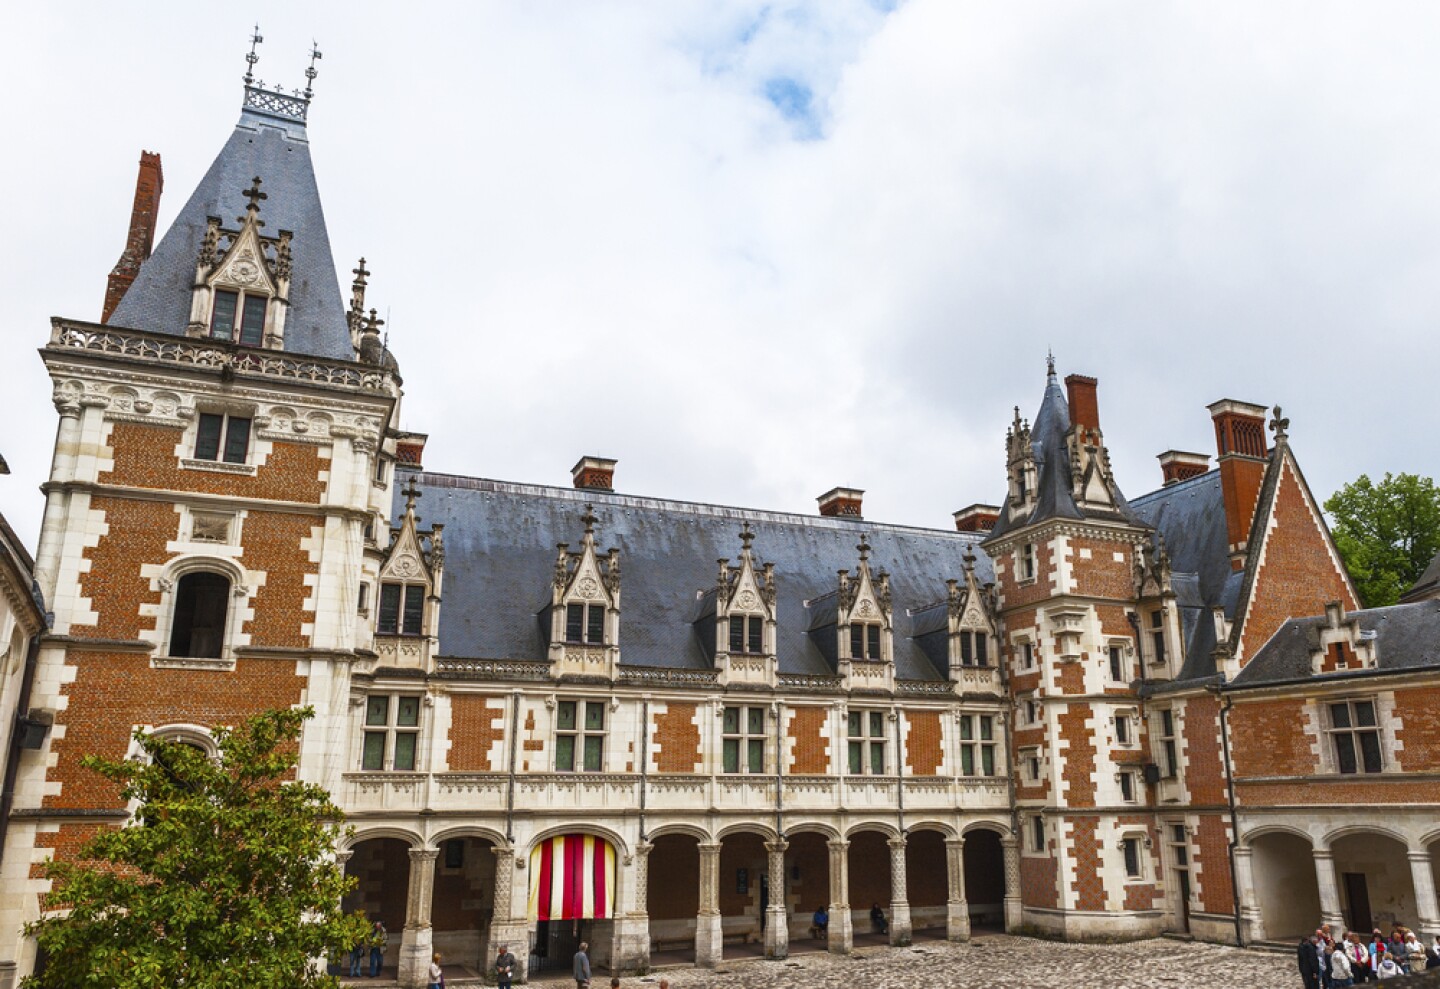 <a>The different architectural styles of the Chateâu Blois make its details all the more appealing to explore.</a>